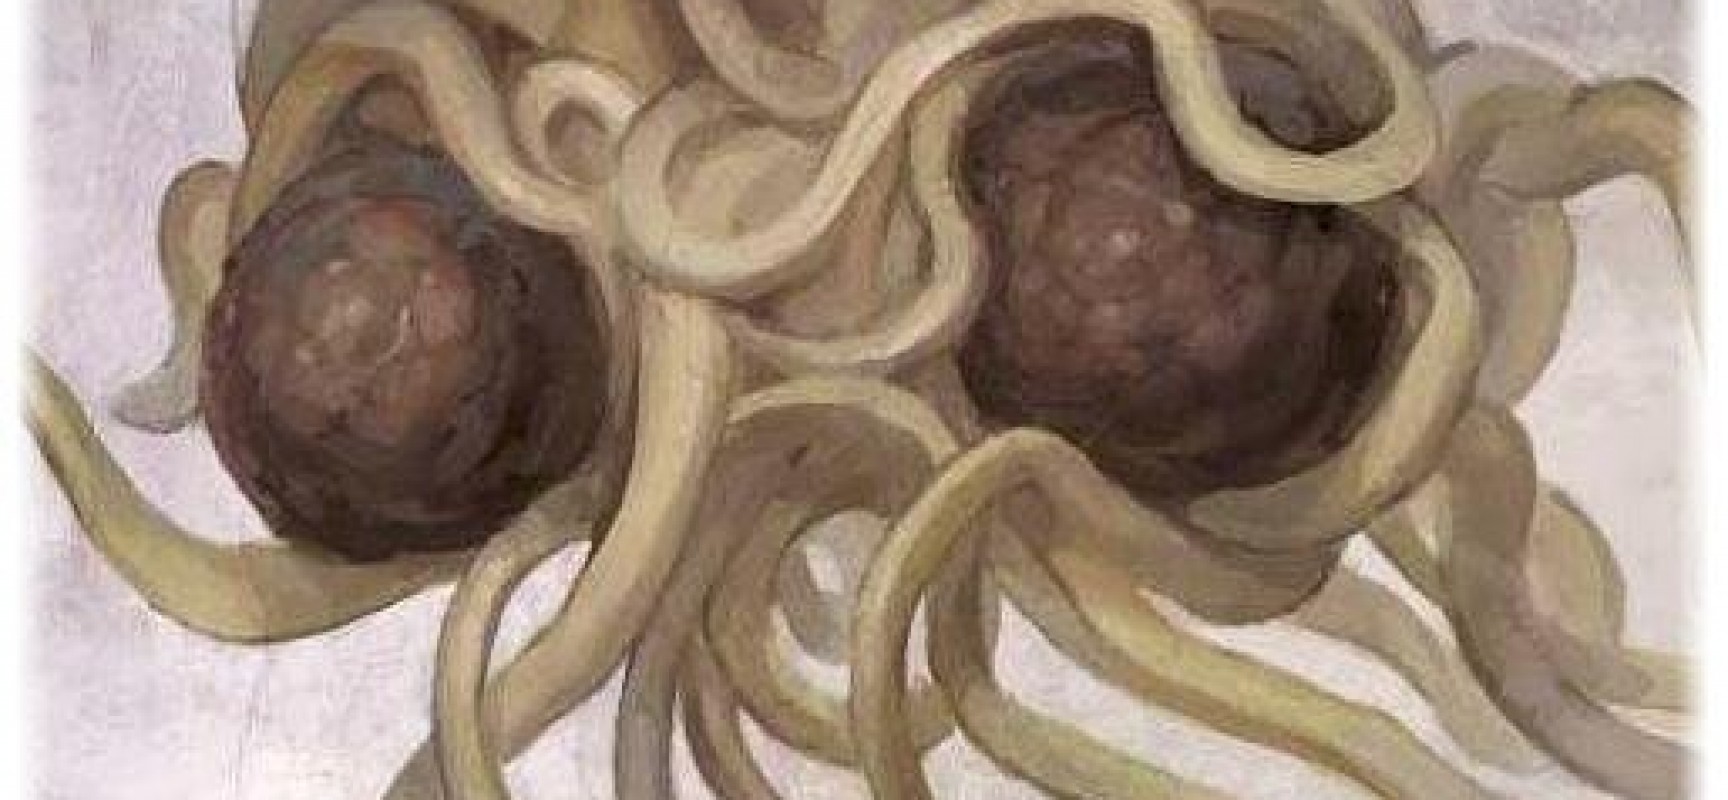 Pastafarianism: All Hail His Noodliness